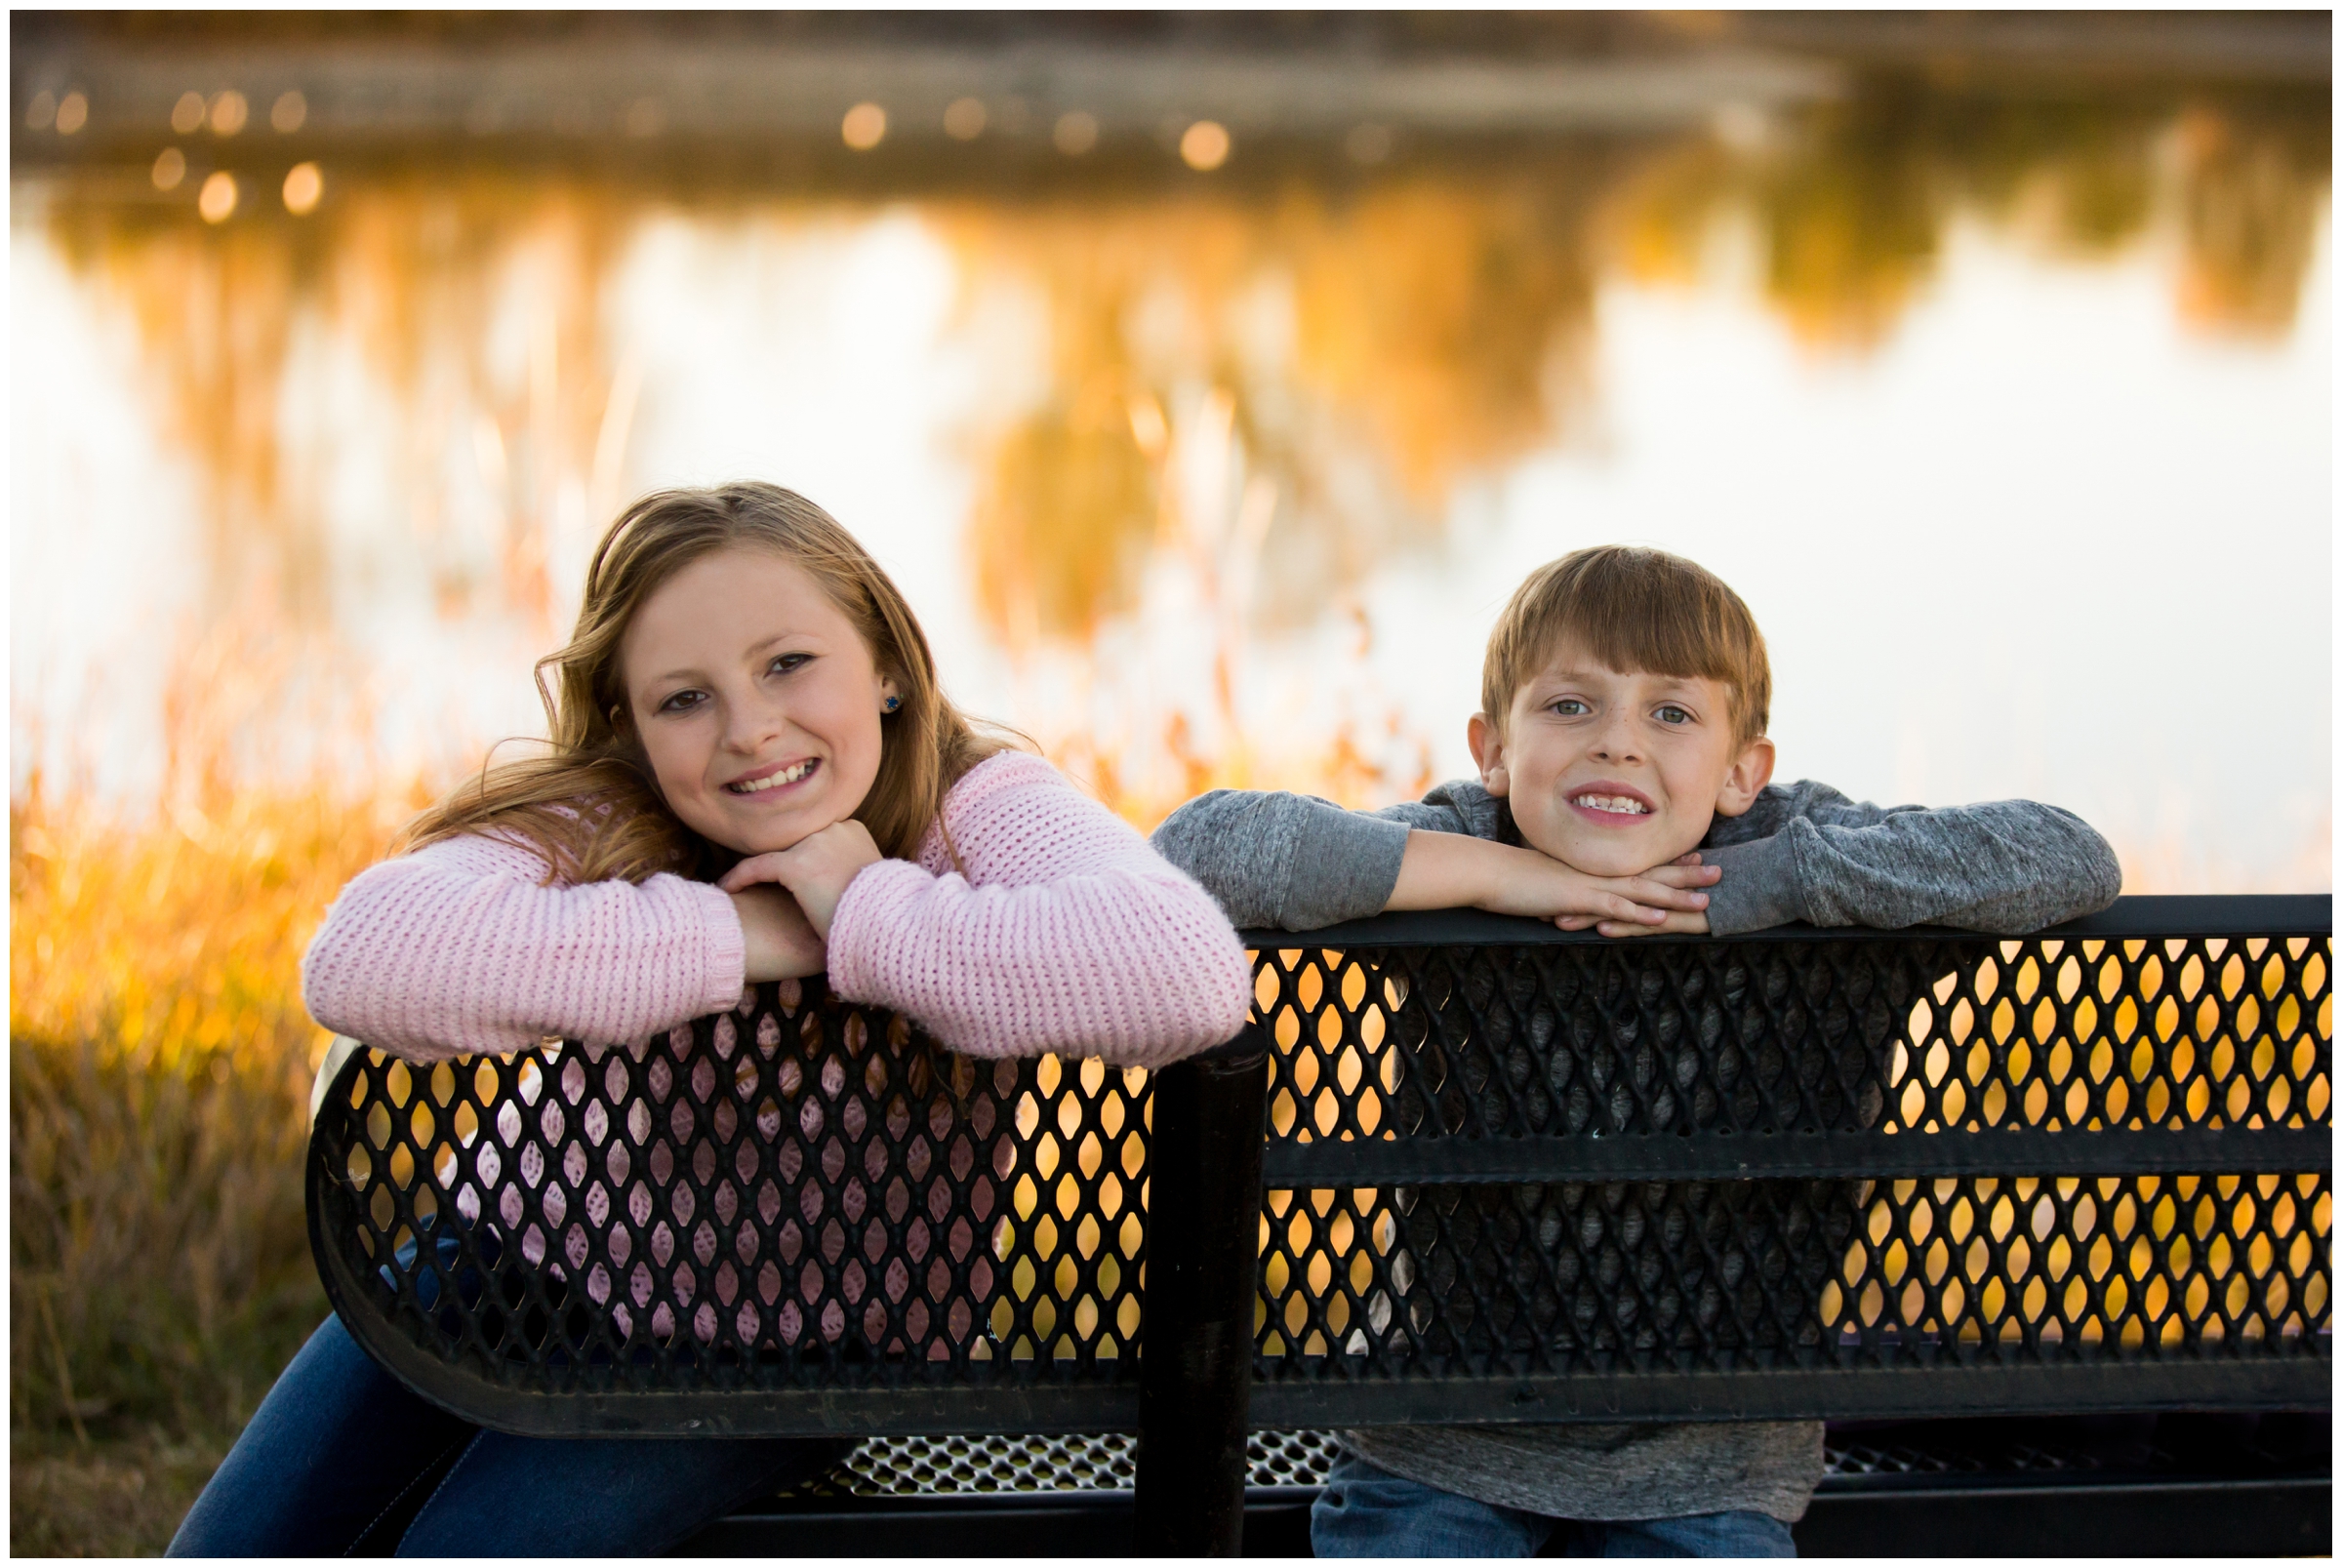 Longmont Colorado family portraits at Golden Ponds by photographer Plum Pretty Photography. Colorful fall family pictures inspiration.